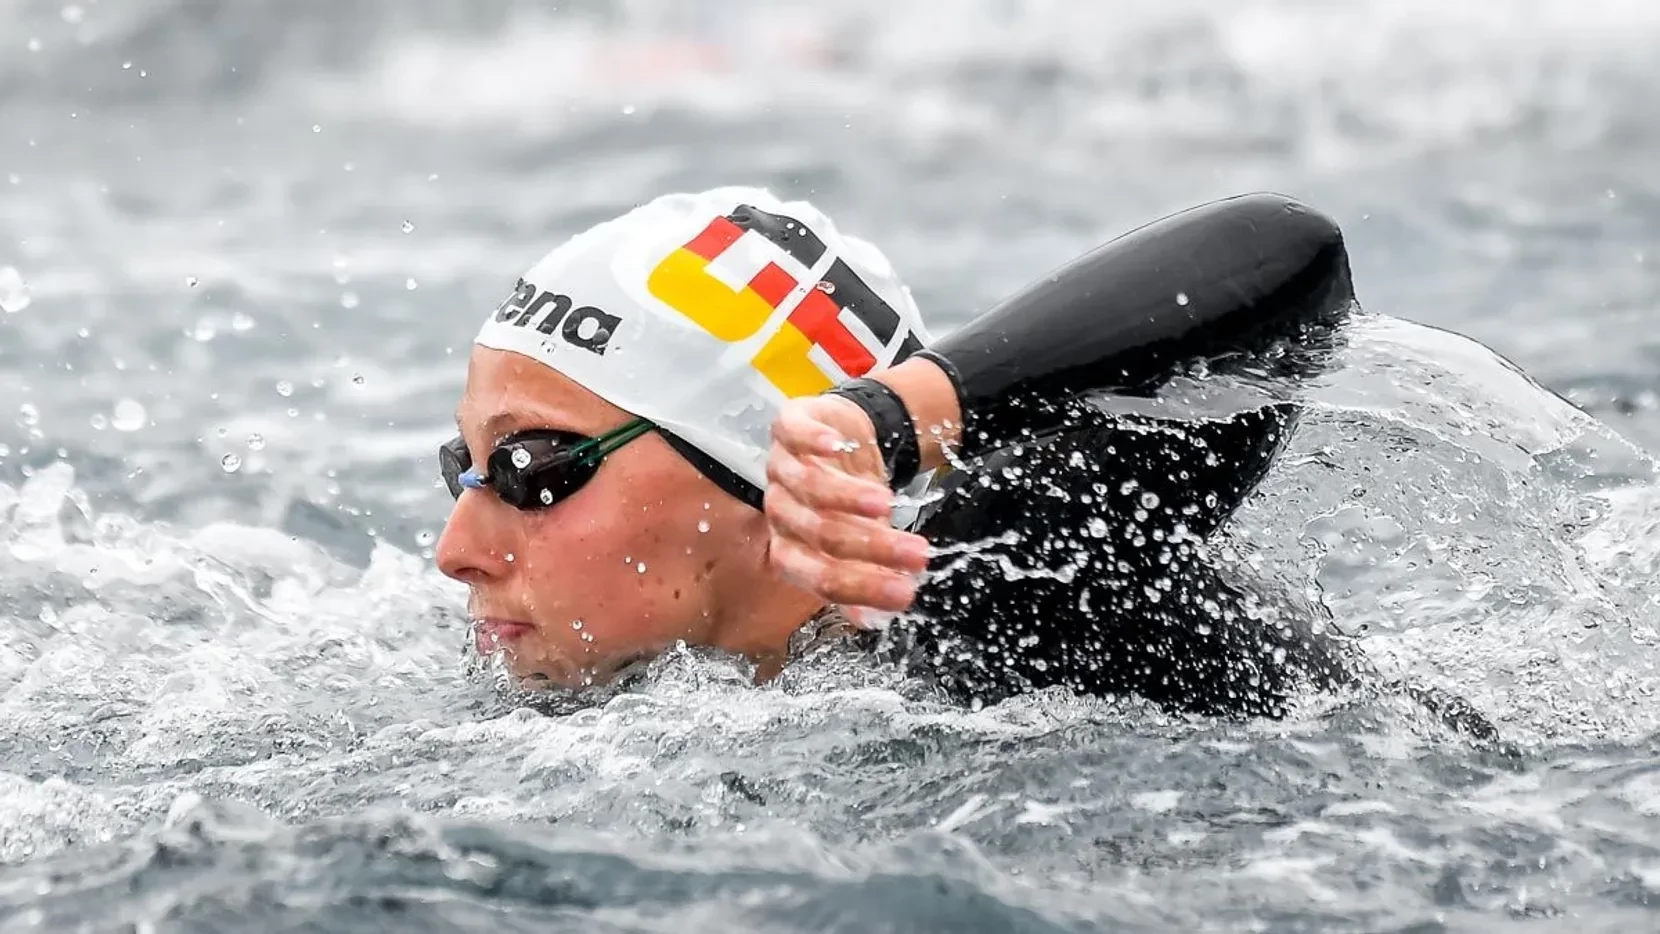 Germany triumph at World Aquatics Open Water Swimming World Cup in Italy